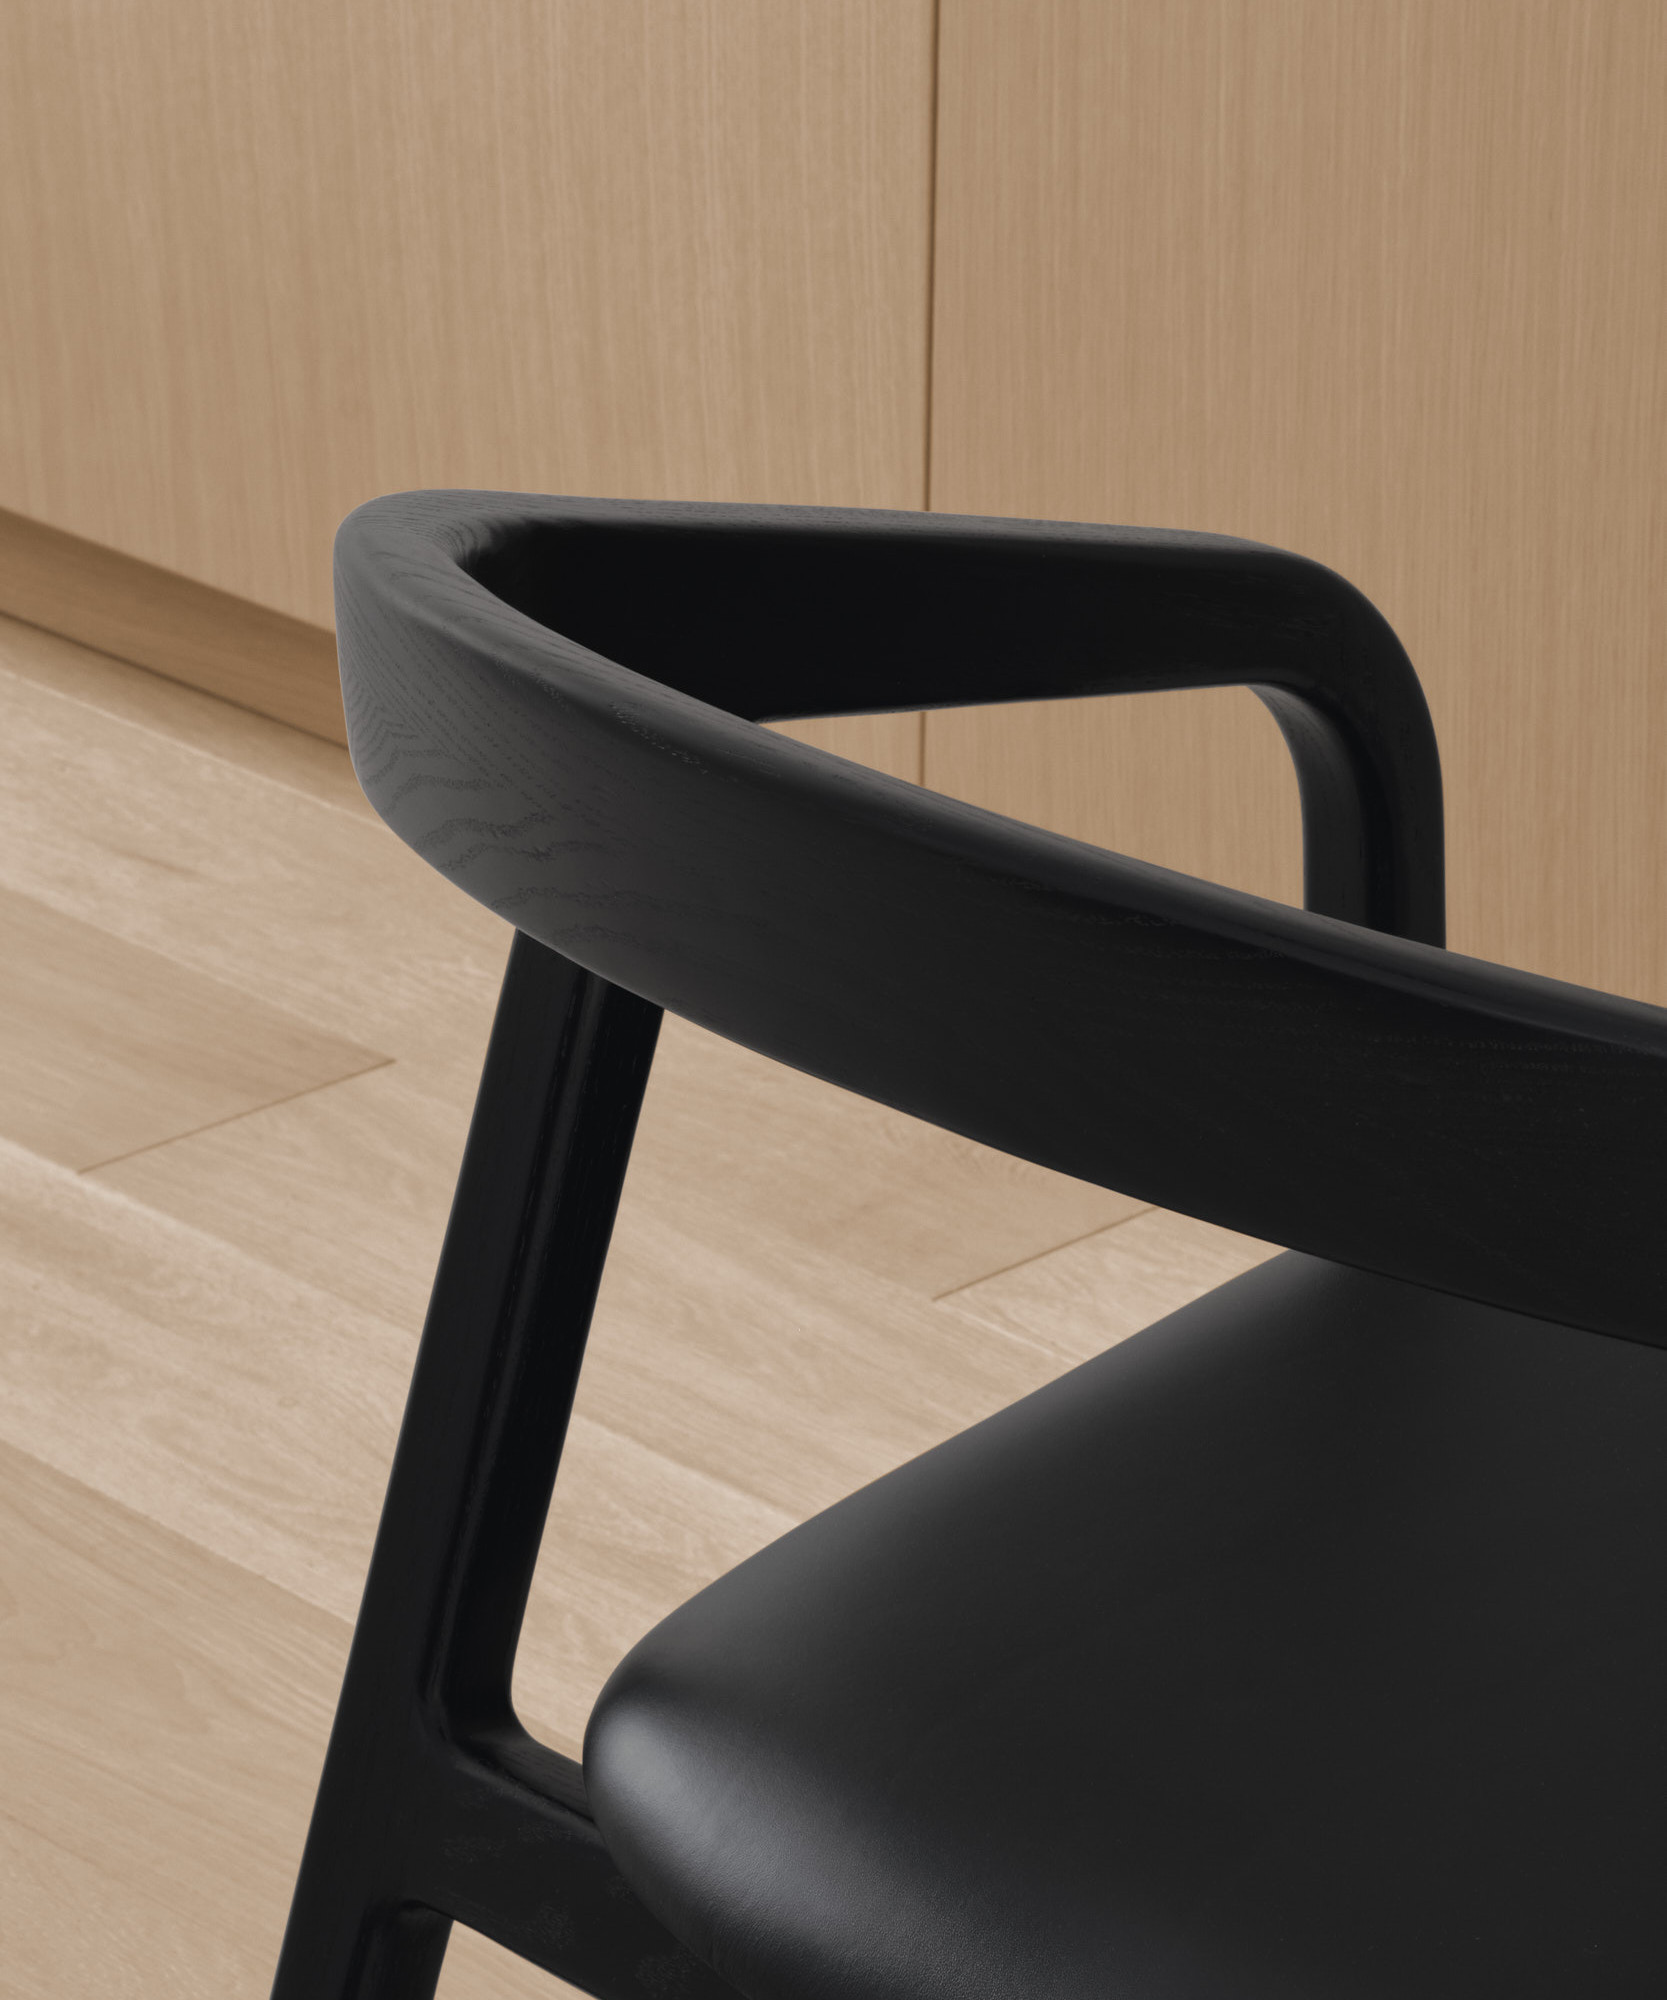 Detail of all black Olm chair